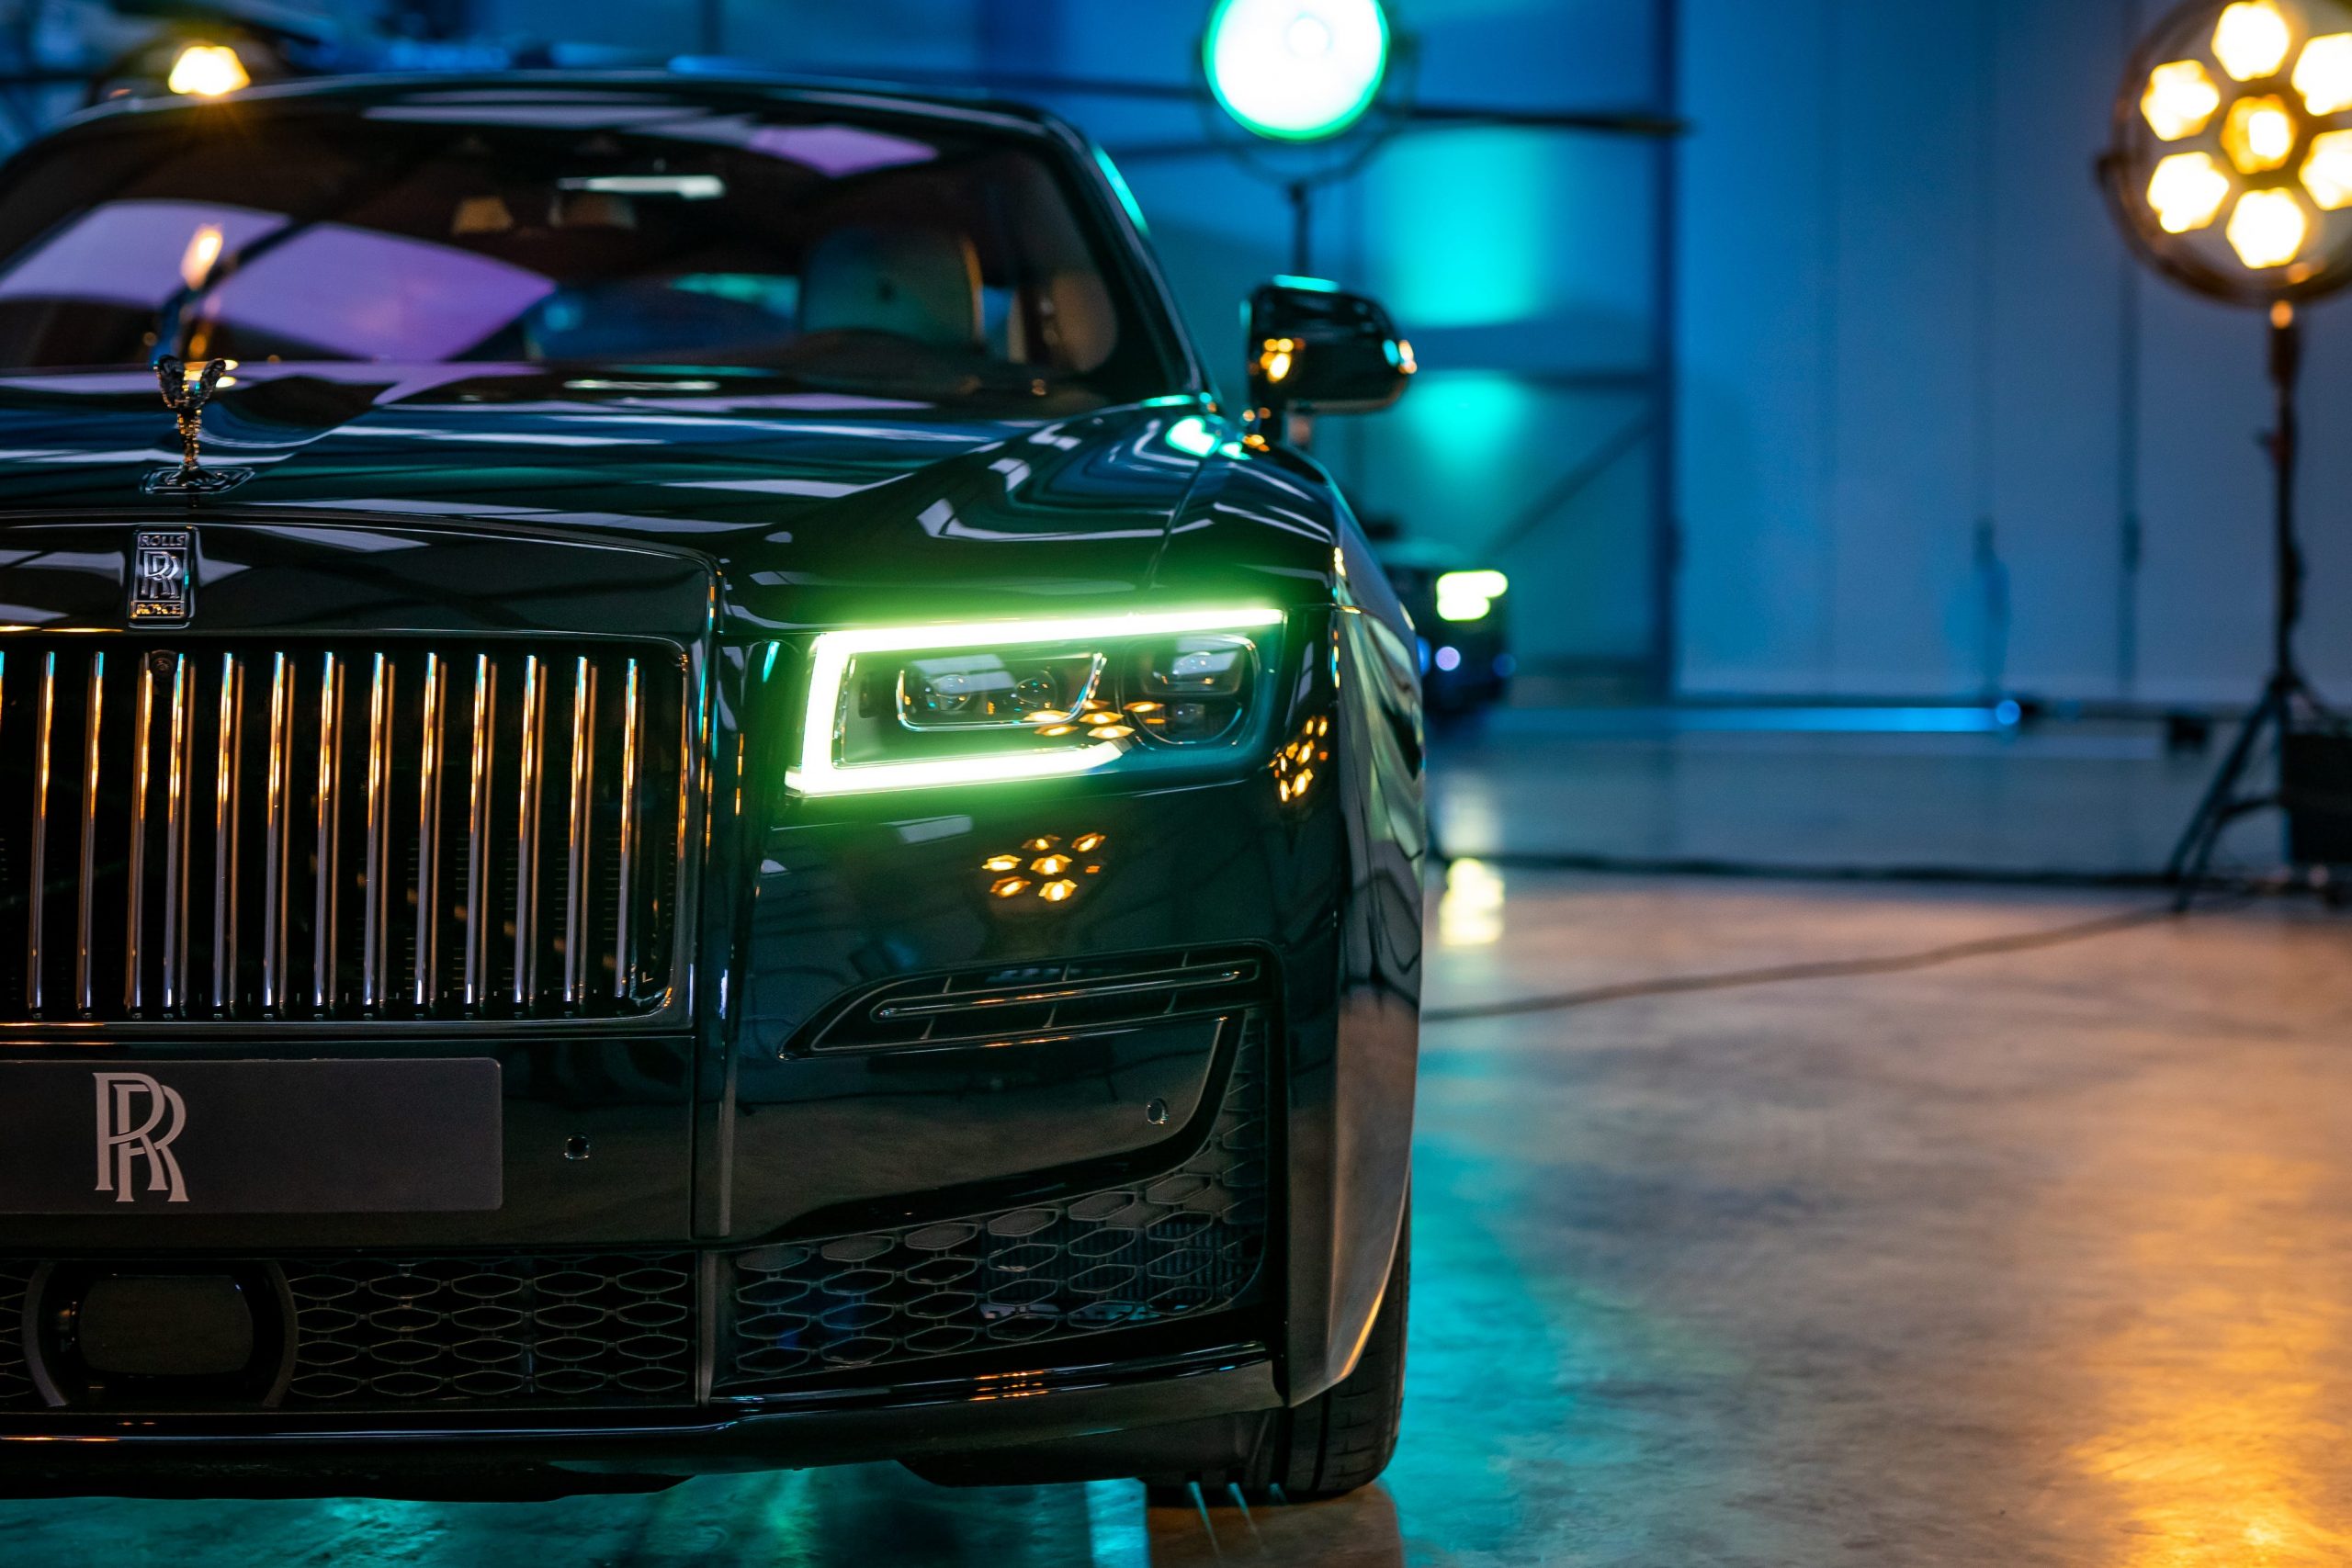 The Rolls-Royce Ghost Black Badge at night.